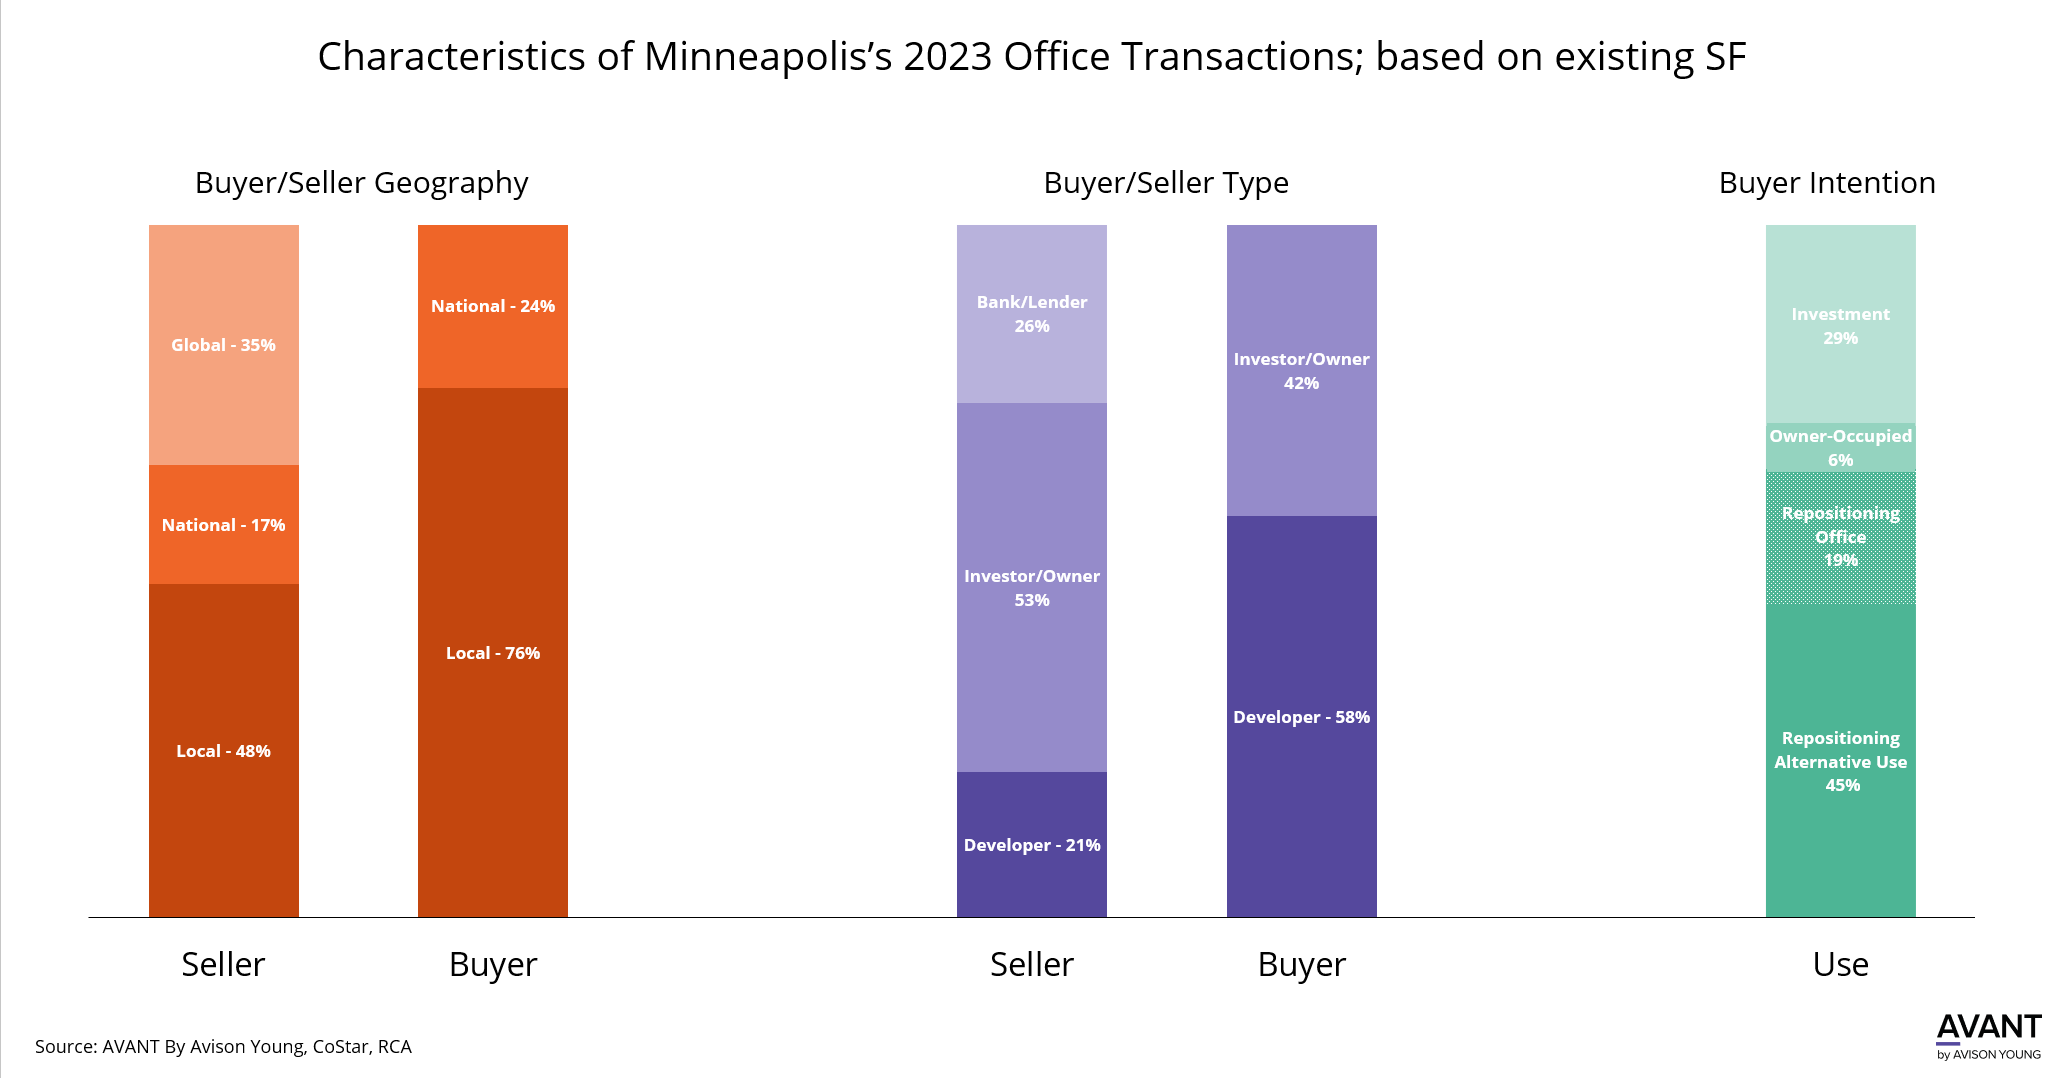 The MSP market's 2023 office sale transactions were analyzed in this chart by buyer and seller geography and type, as well as by buyer intention.